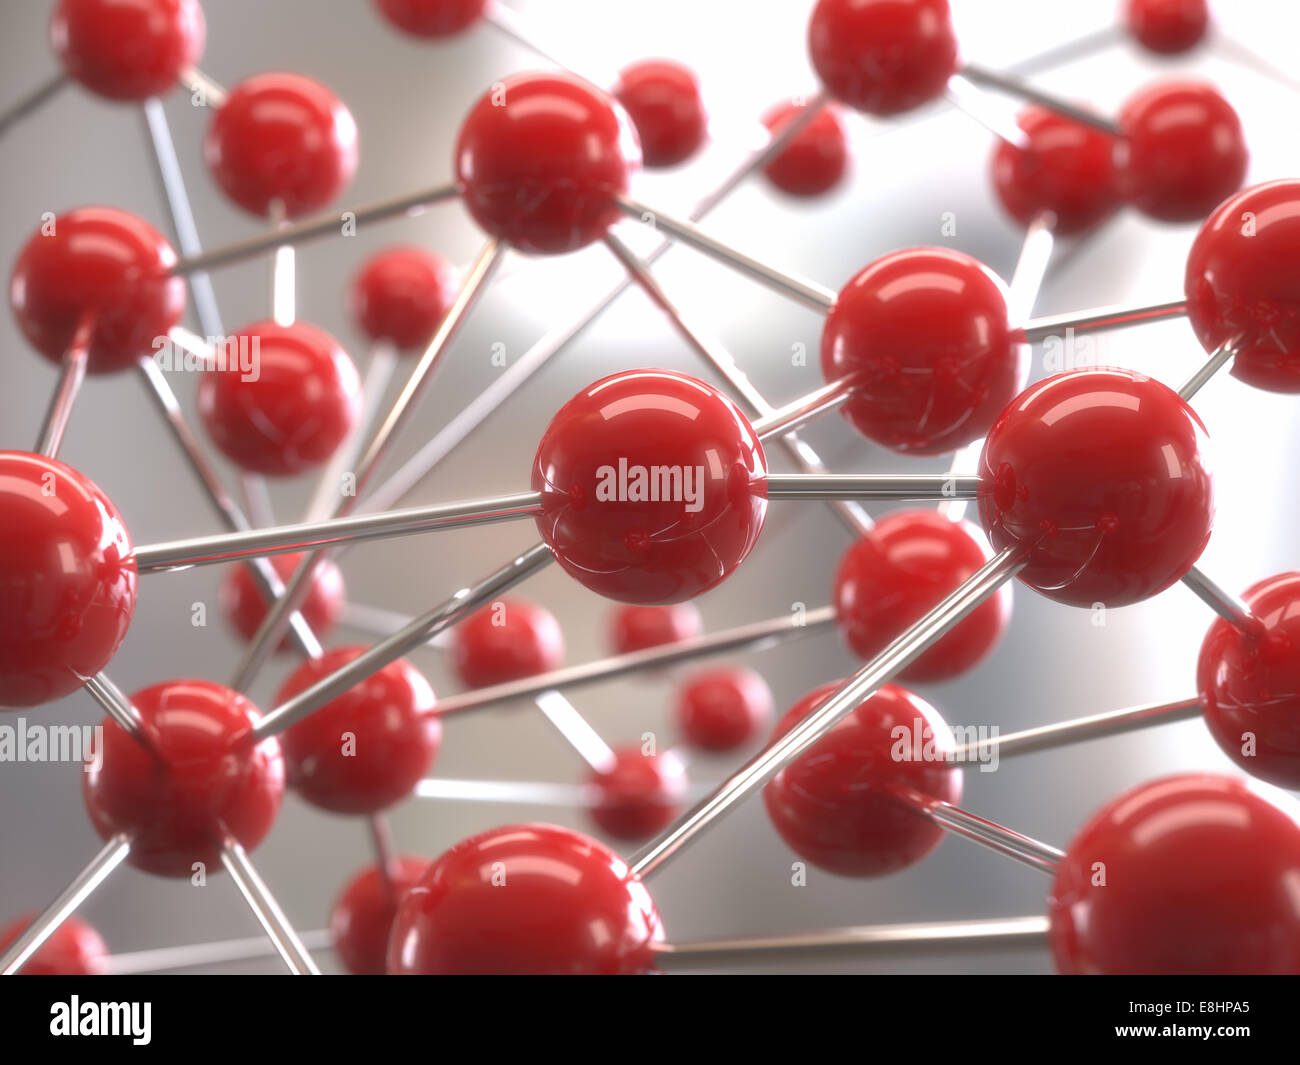 Molecular structure with red spheres interconnected with depth of field. Stock Photo